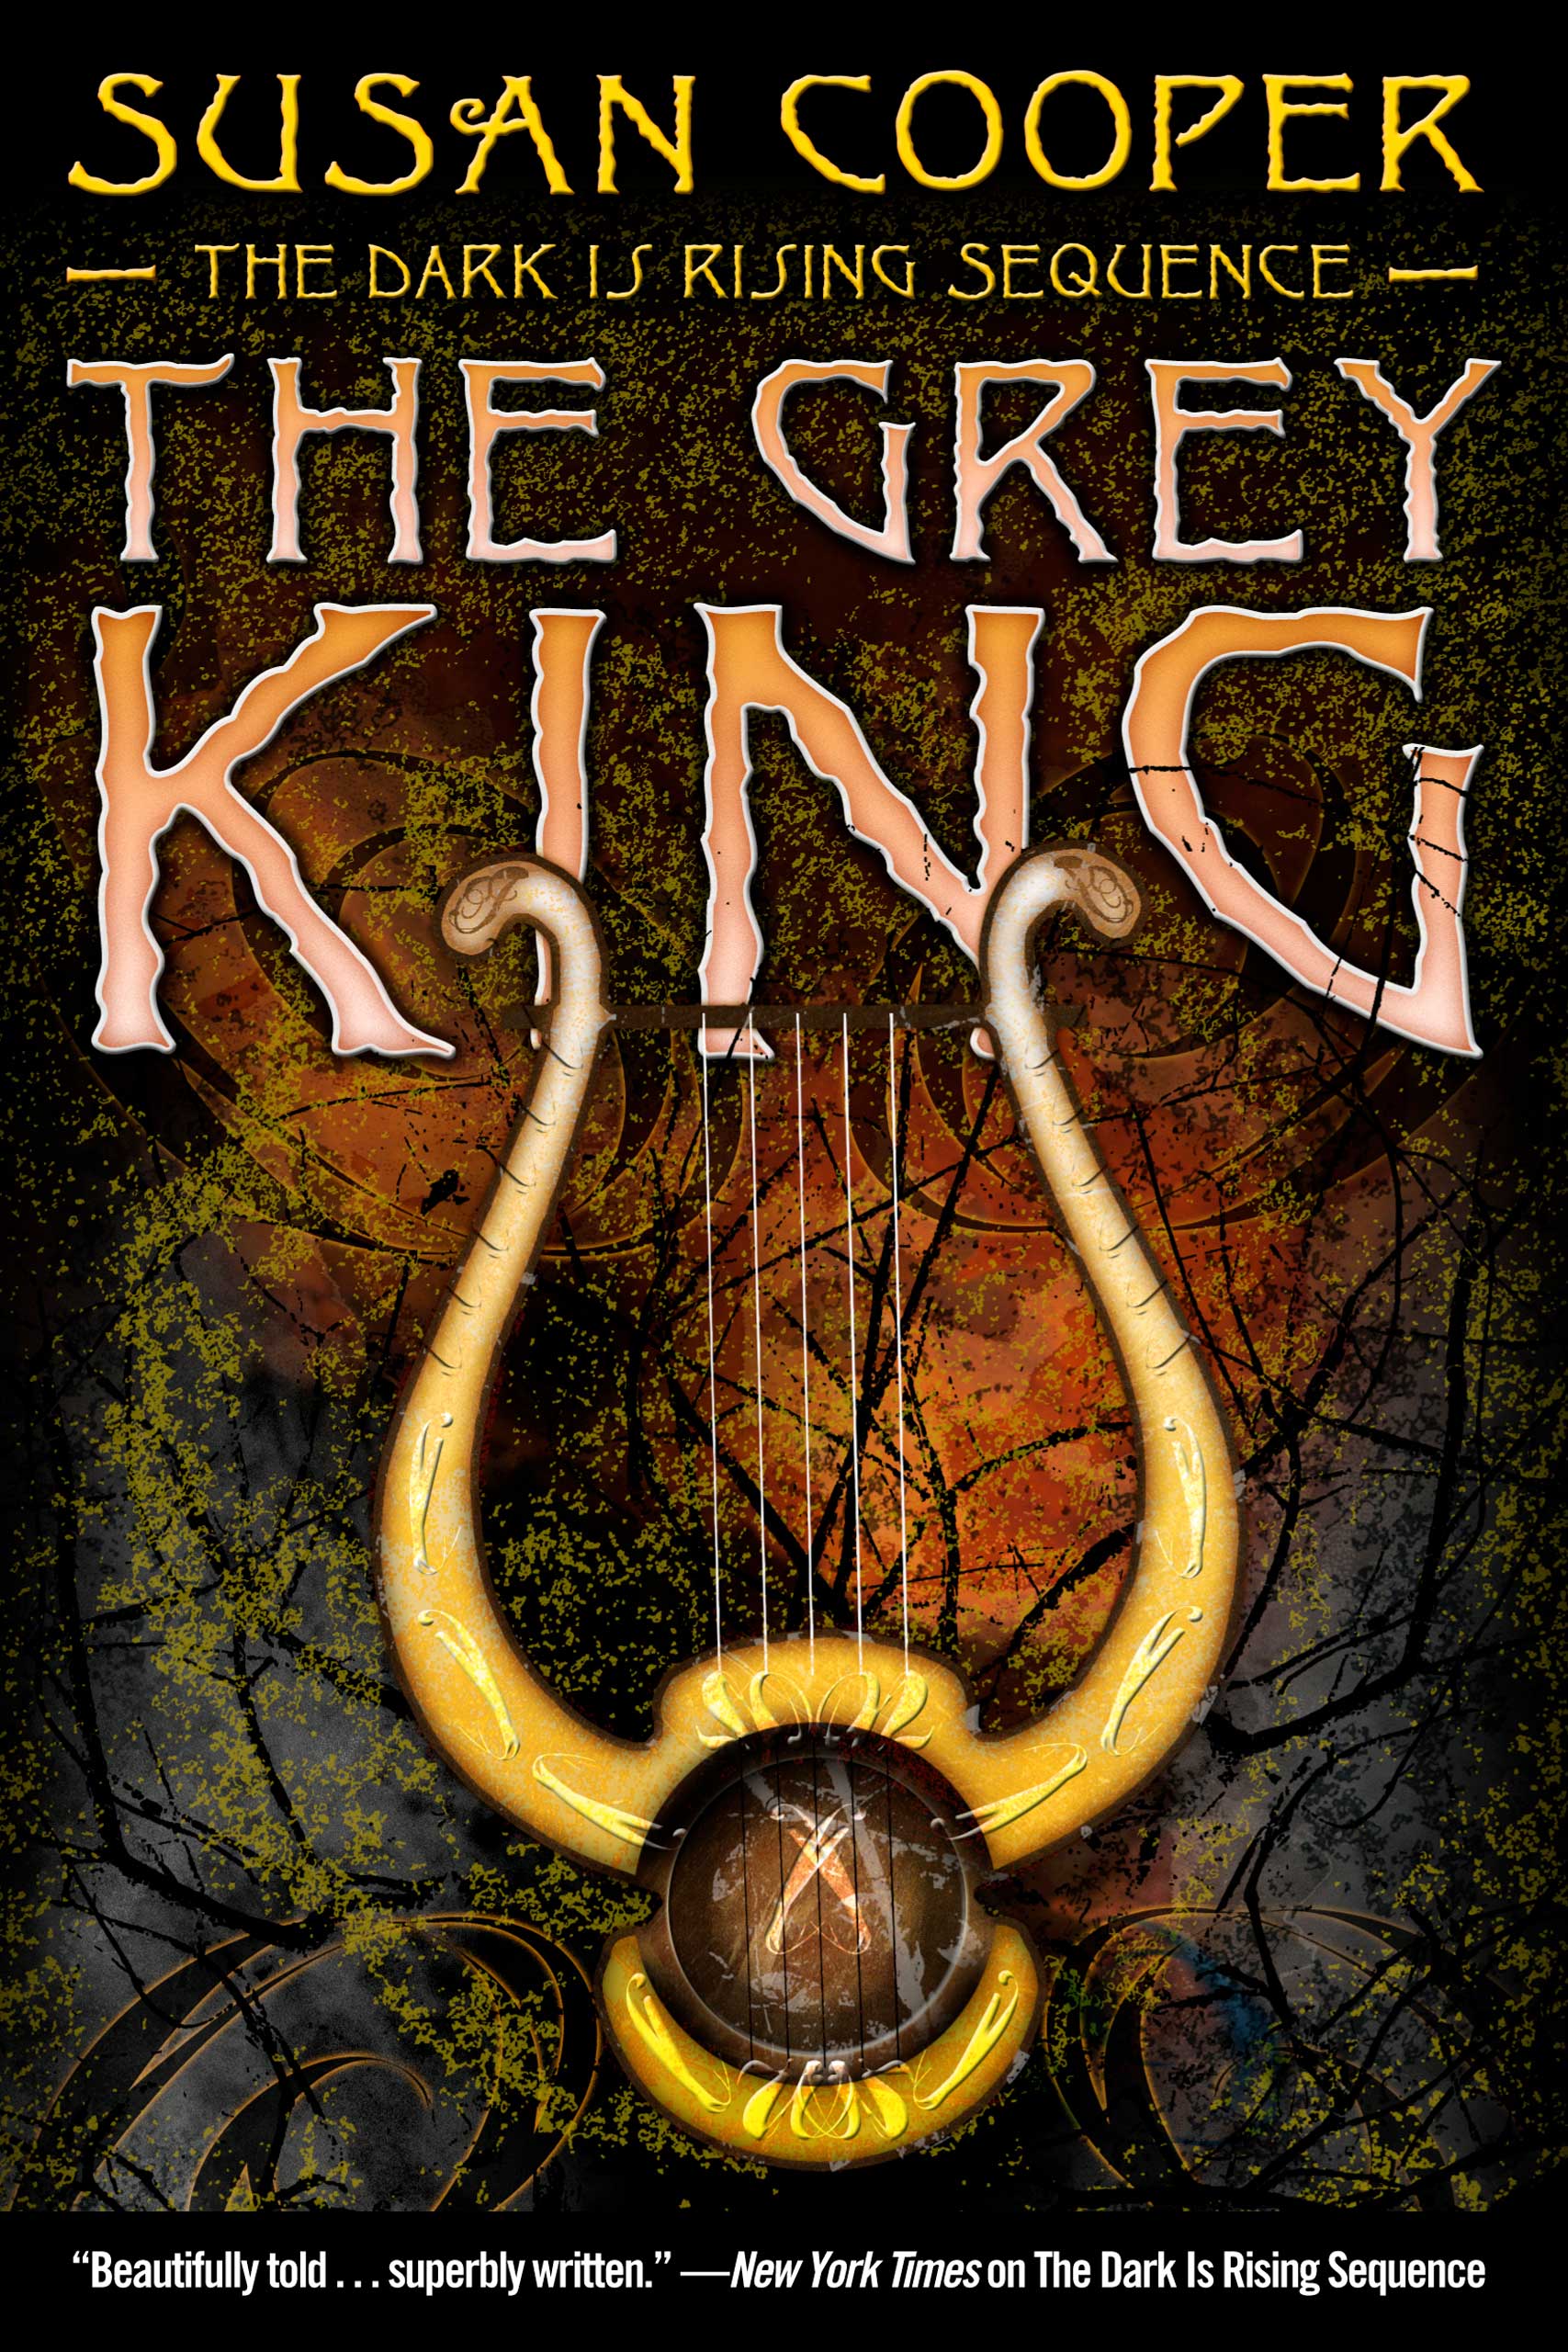 The Grey King, by Susan Cooper.
                              
                              
                              
                              Will Stanton, sent to Wales by his mother to recover from an illness, finds himself a protagonist in Welsh legend and must awaken other immortals to join him in a fight between good and evil.
                              
                              
                              
                              Buy now: The Grey King